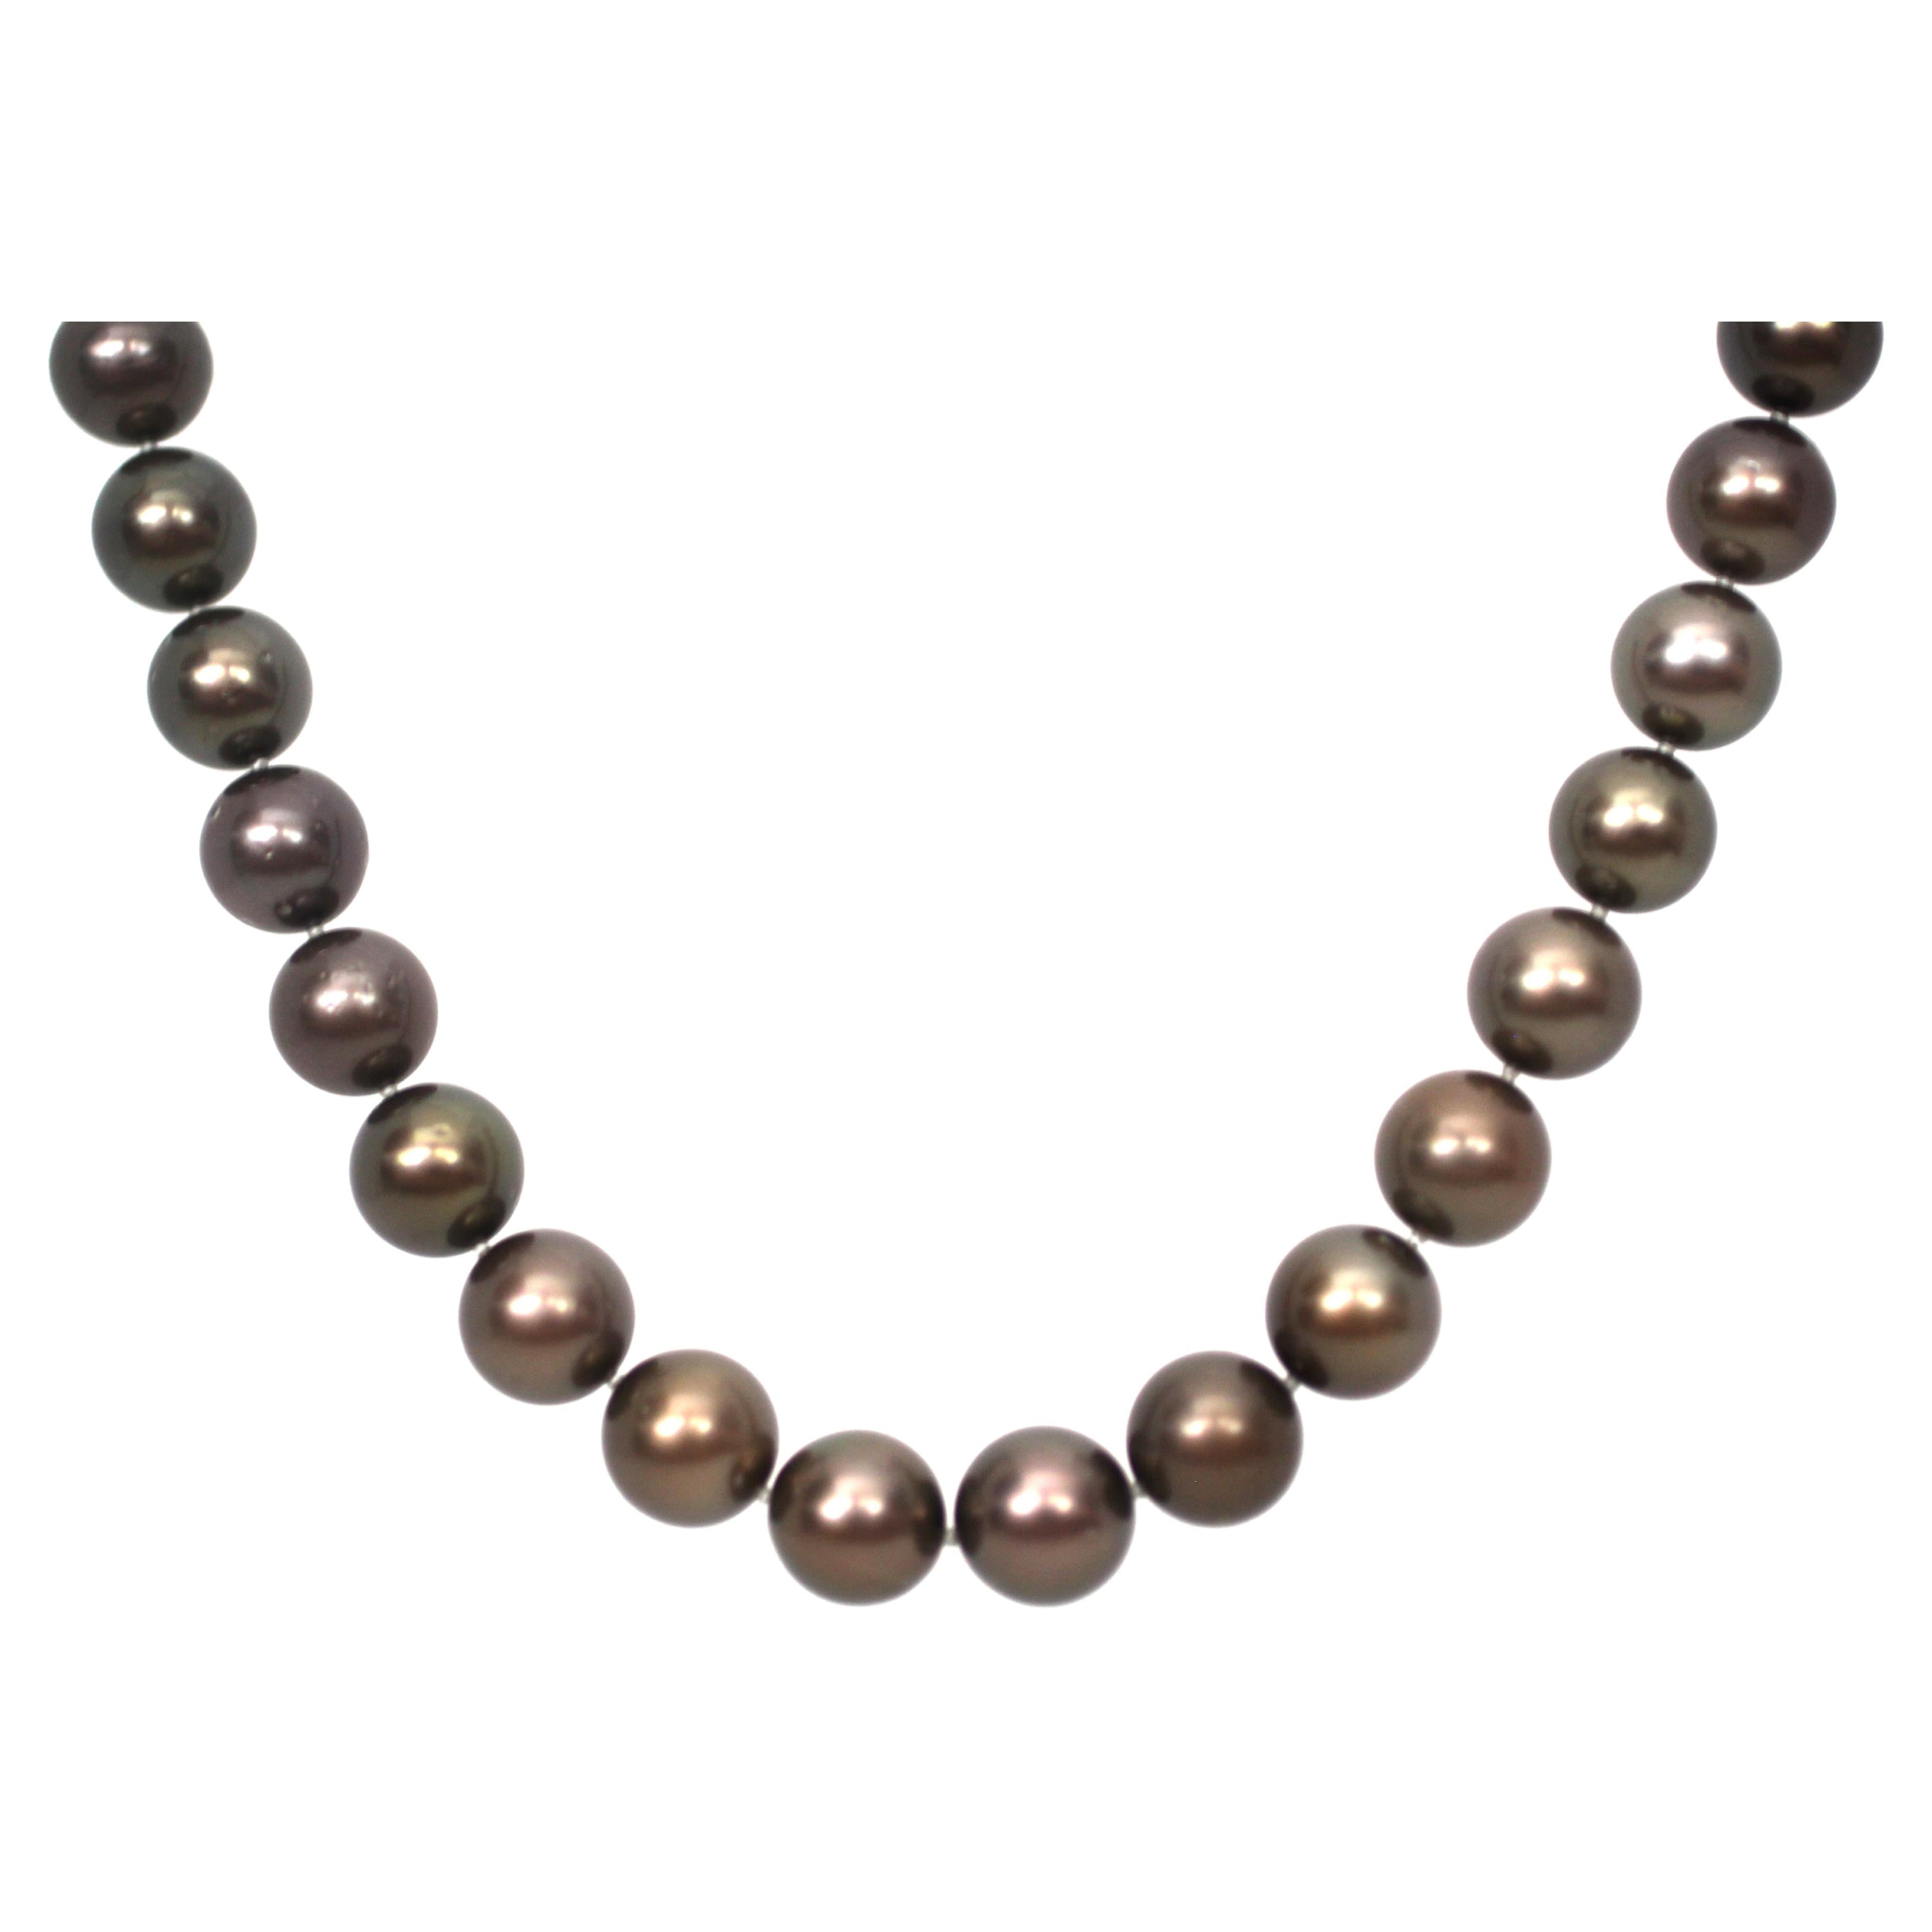 Hakimoto By Jewel Of Ocean 18KTahitian South Sea Strand Necklace
18K White Gold With Diamond Clasp 
Weight (g): 76.8
Cultured Tahitian South Sea Pearl 
Pearl Size: 11X12mm 
Pearl Shape: Round 
Body color: Brown
Orient: Good
Luster: Good 
Surface: